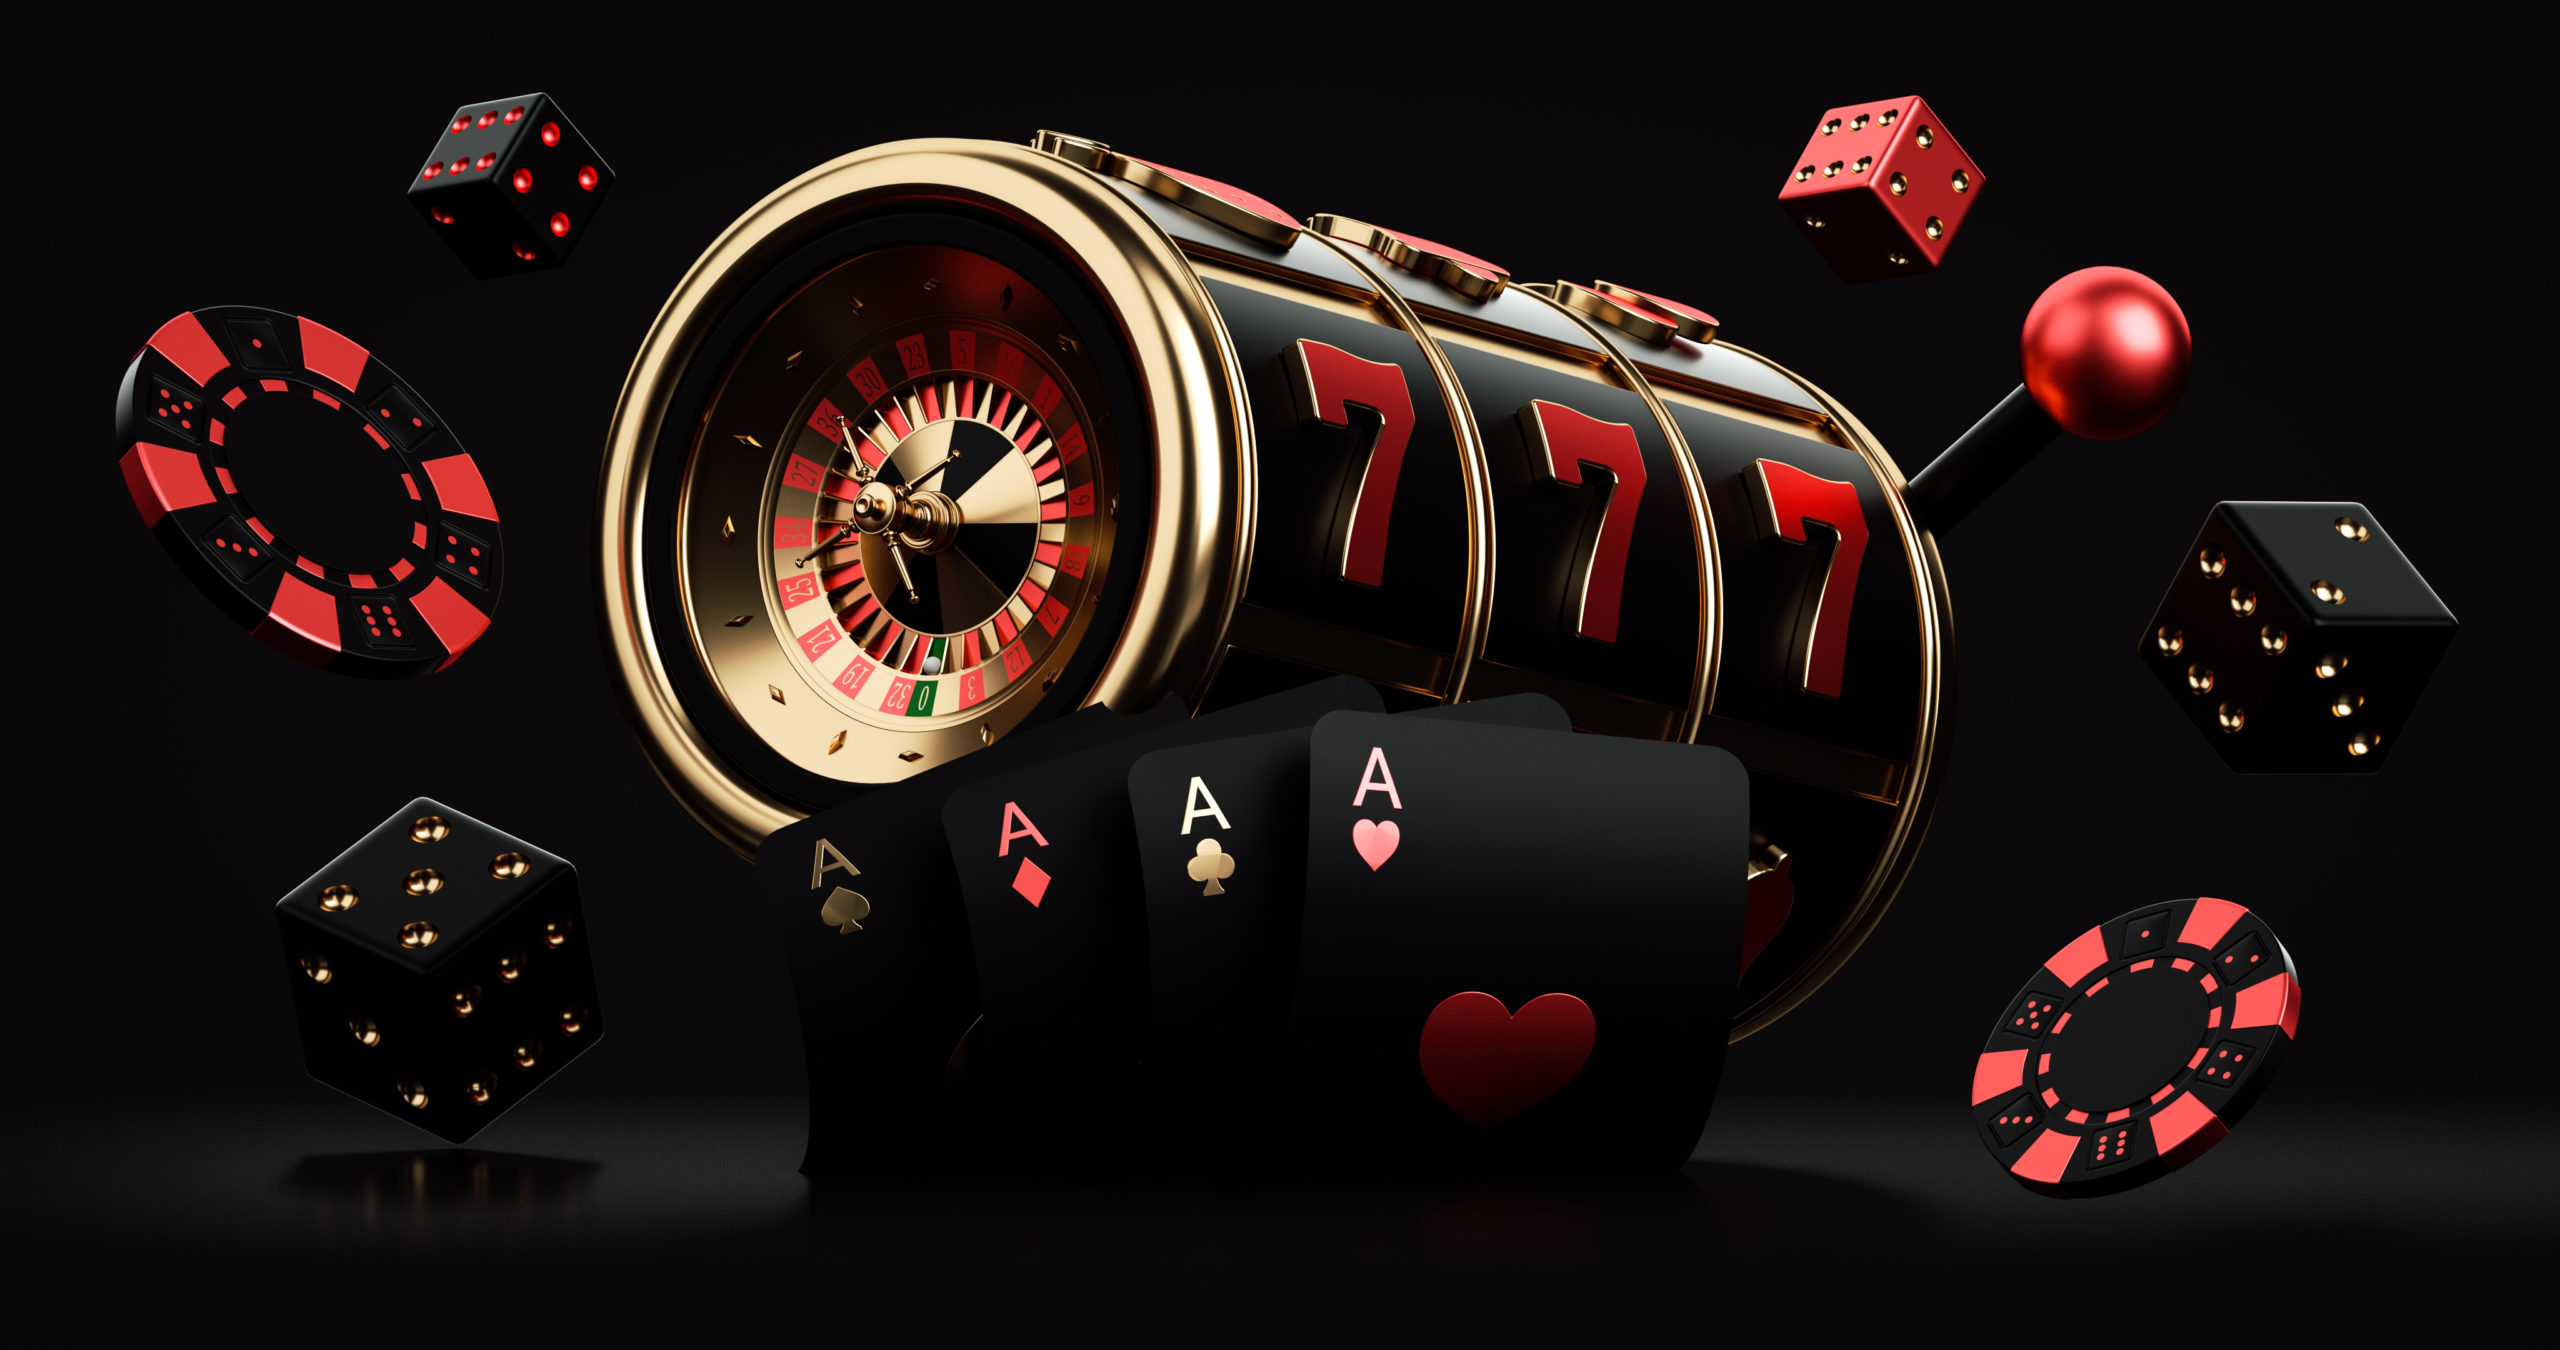 If you appreciate to try out internet poker , you must enter in a good online site post thumbnail image